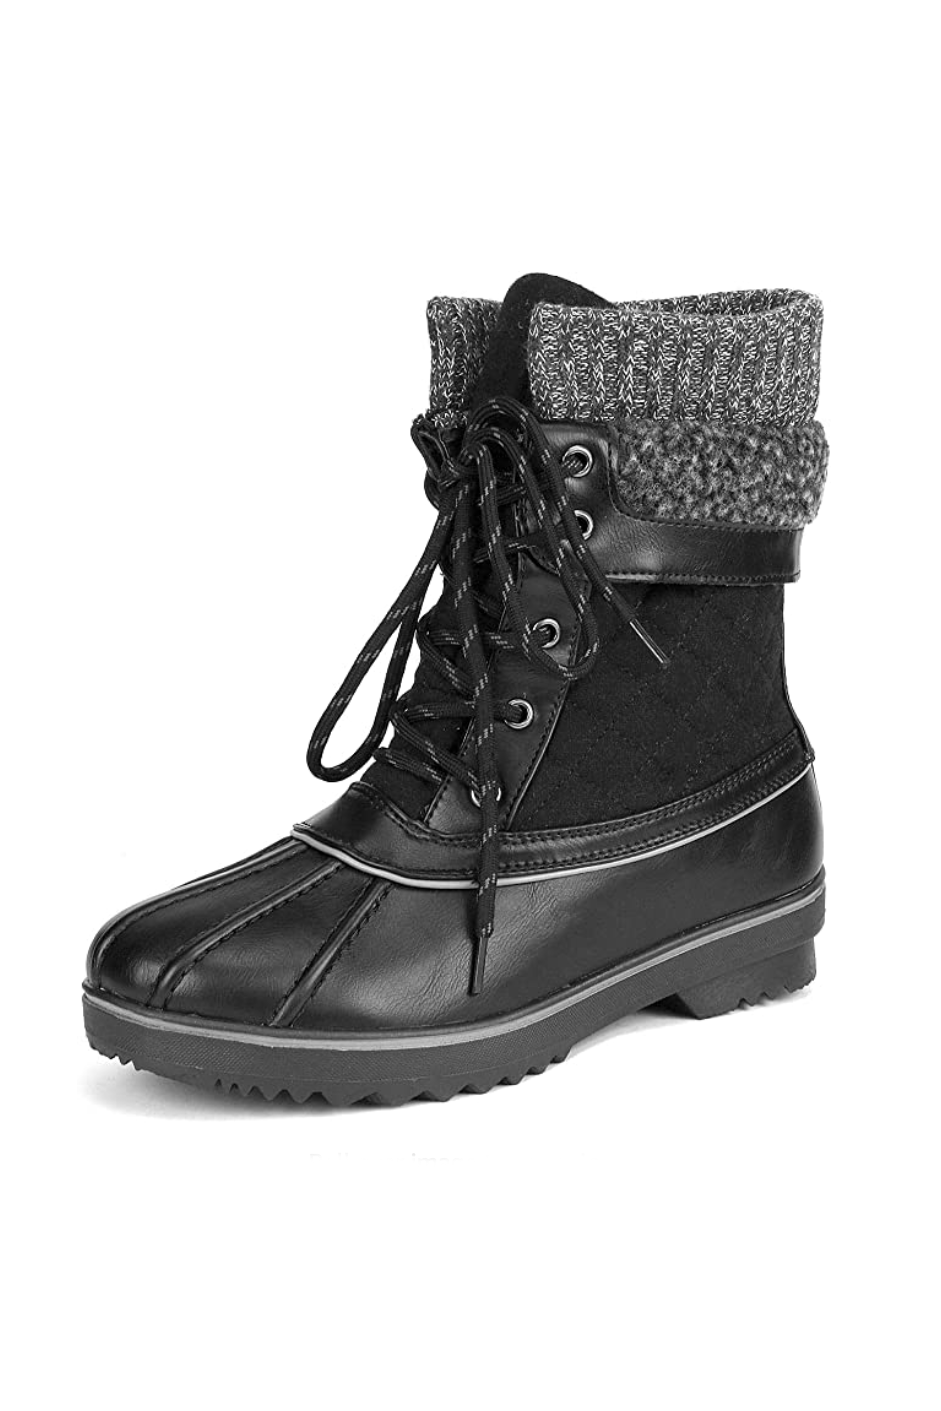 Buy > cute leather boots > in stock